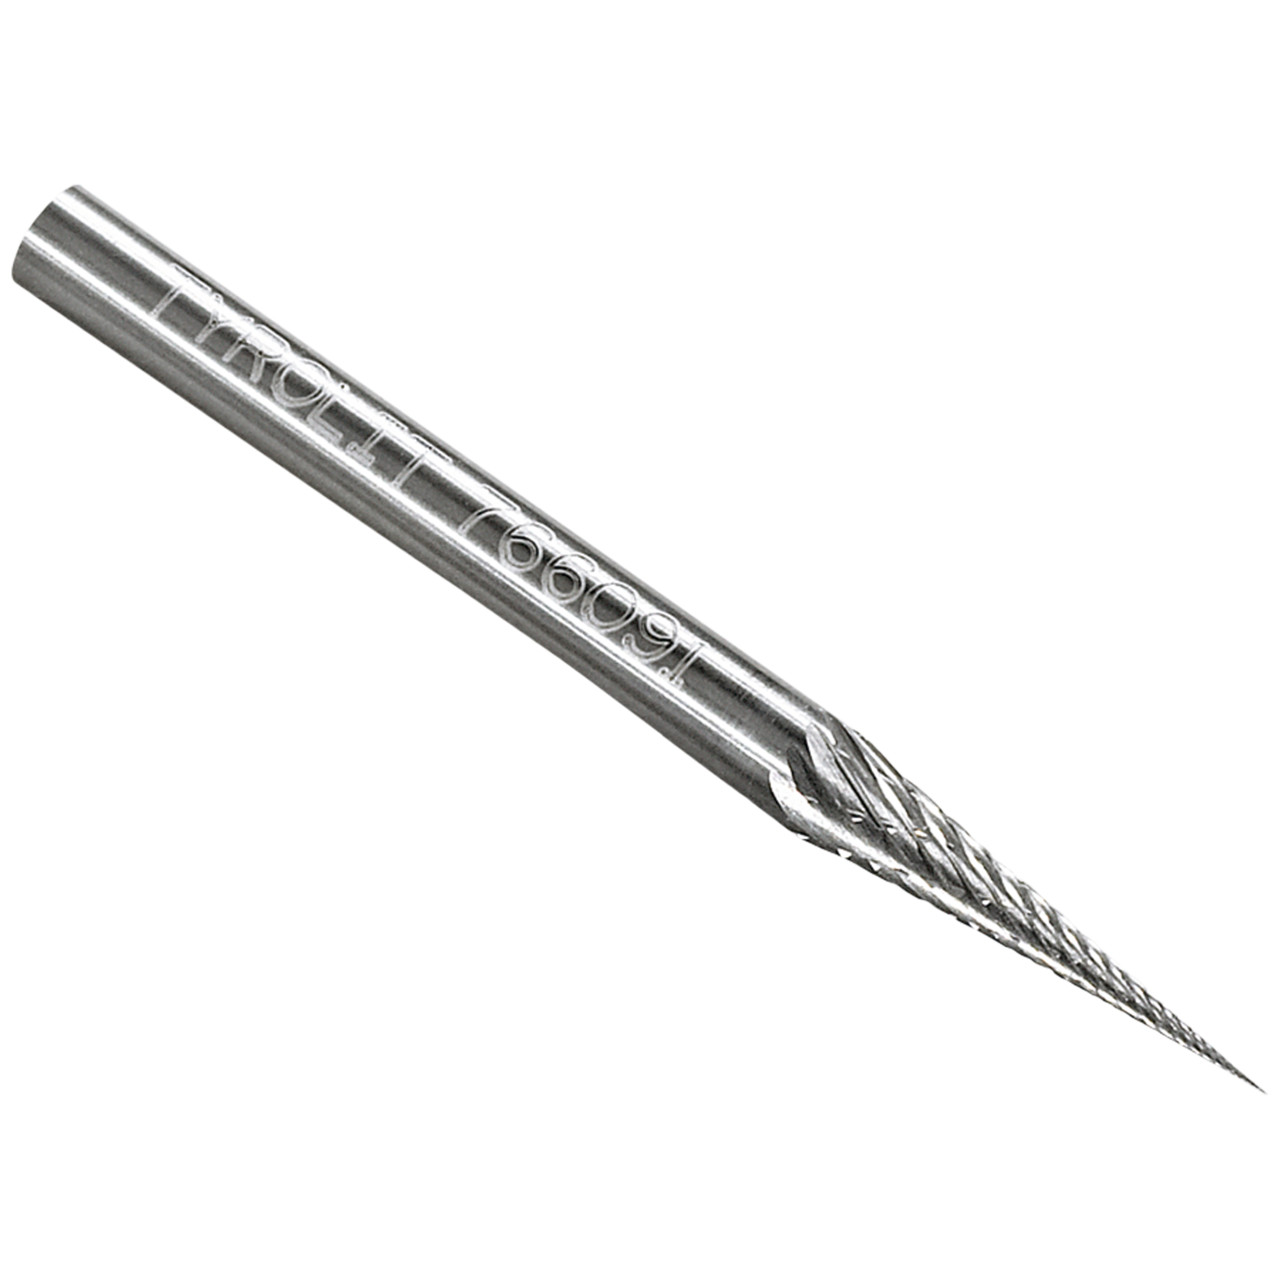 TYROLIT carbide end mill DxT-SxL 3x11-3x38 For cast iron, steel and stainless steel, shape: 52SKM - pointed cone, Art. 801365